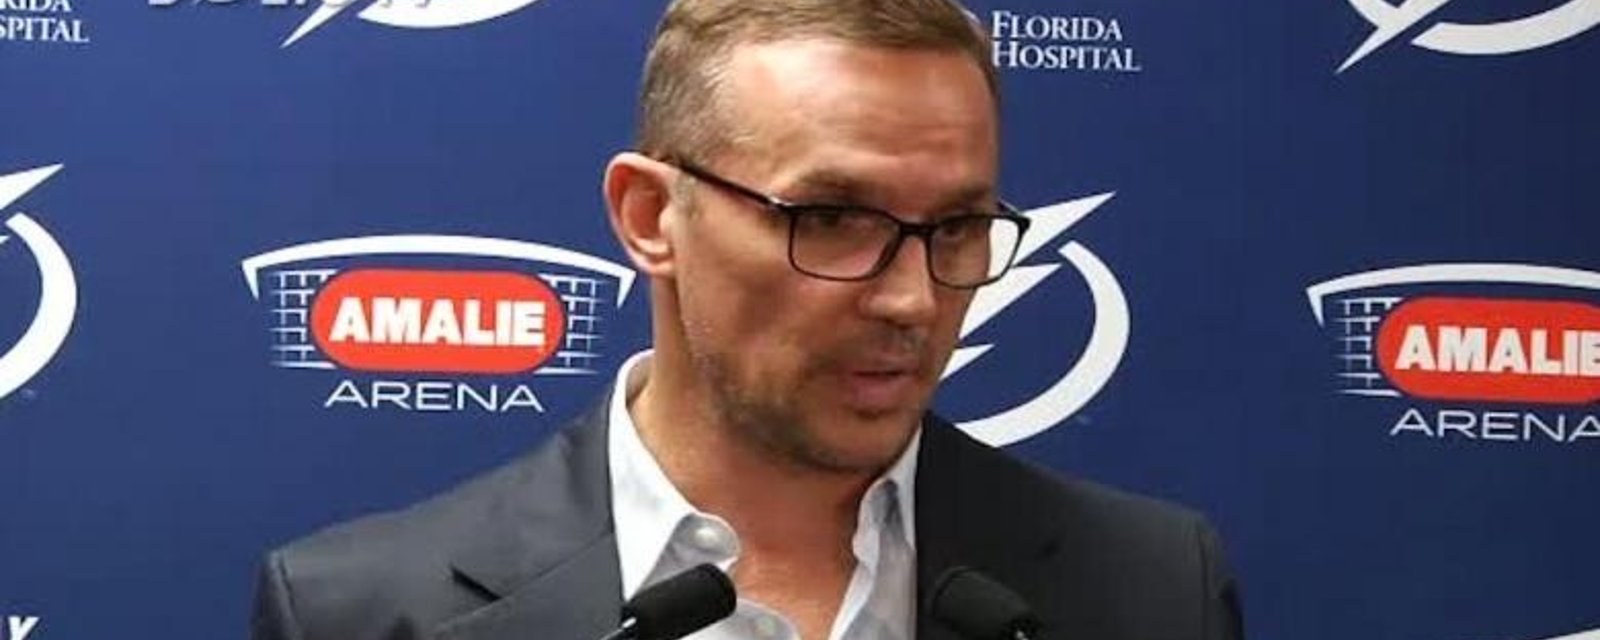 Tampa Bay GM Steve Yzerman comments on the Drouin situation.